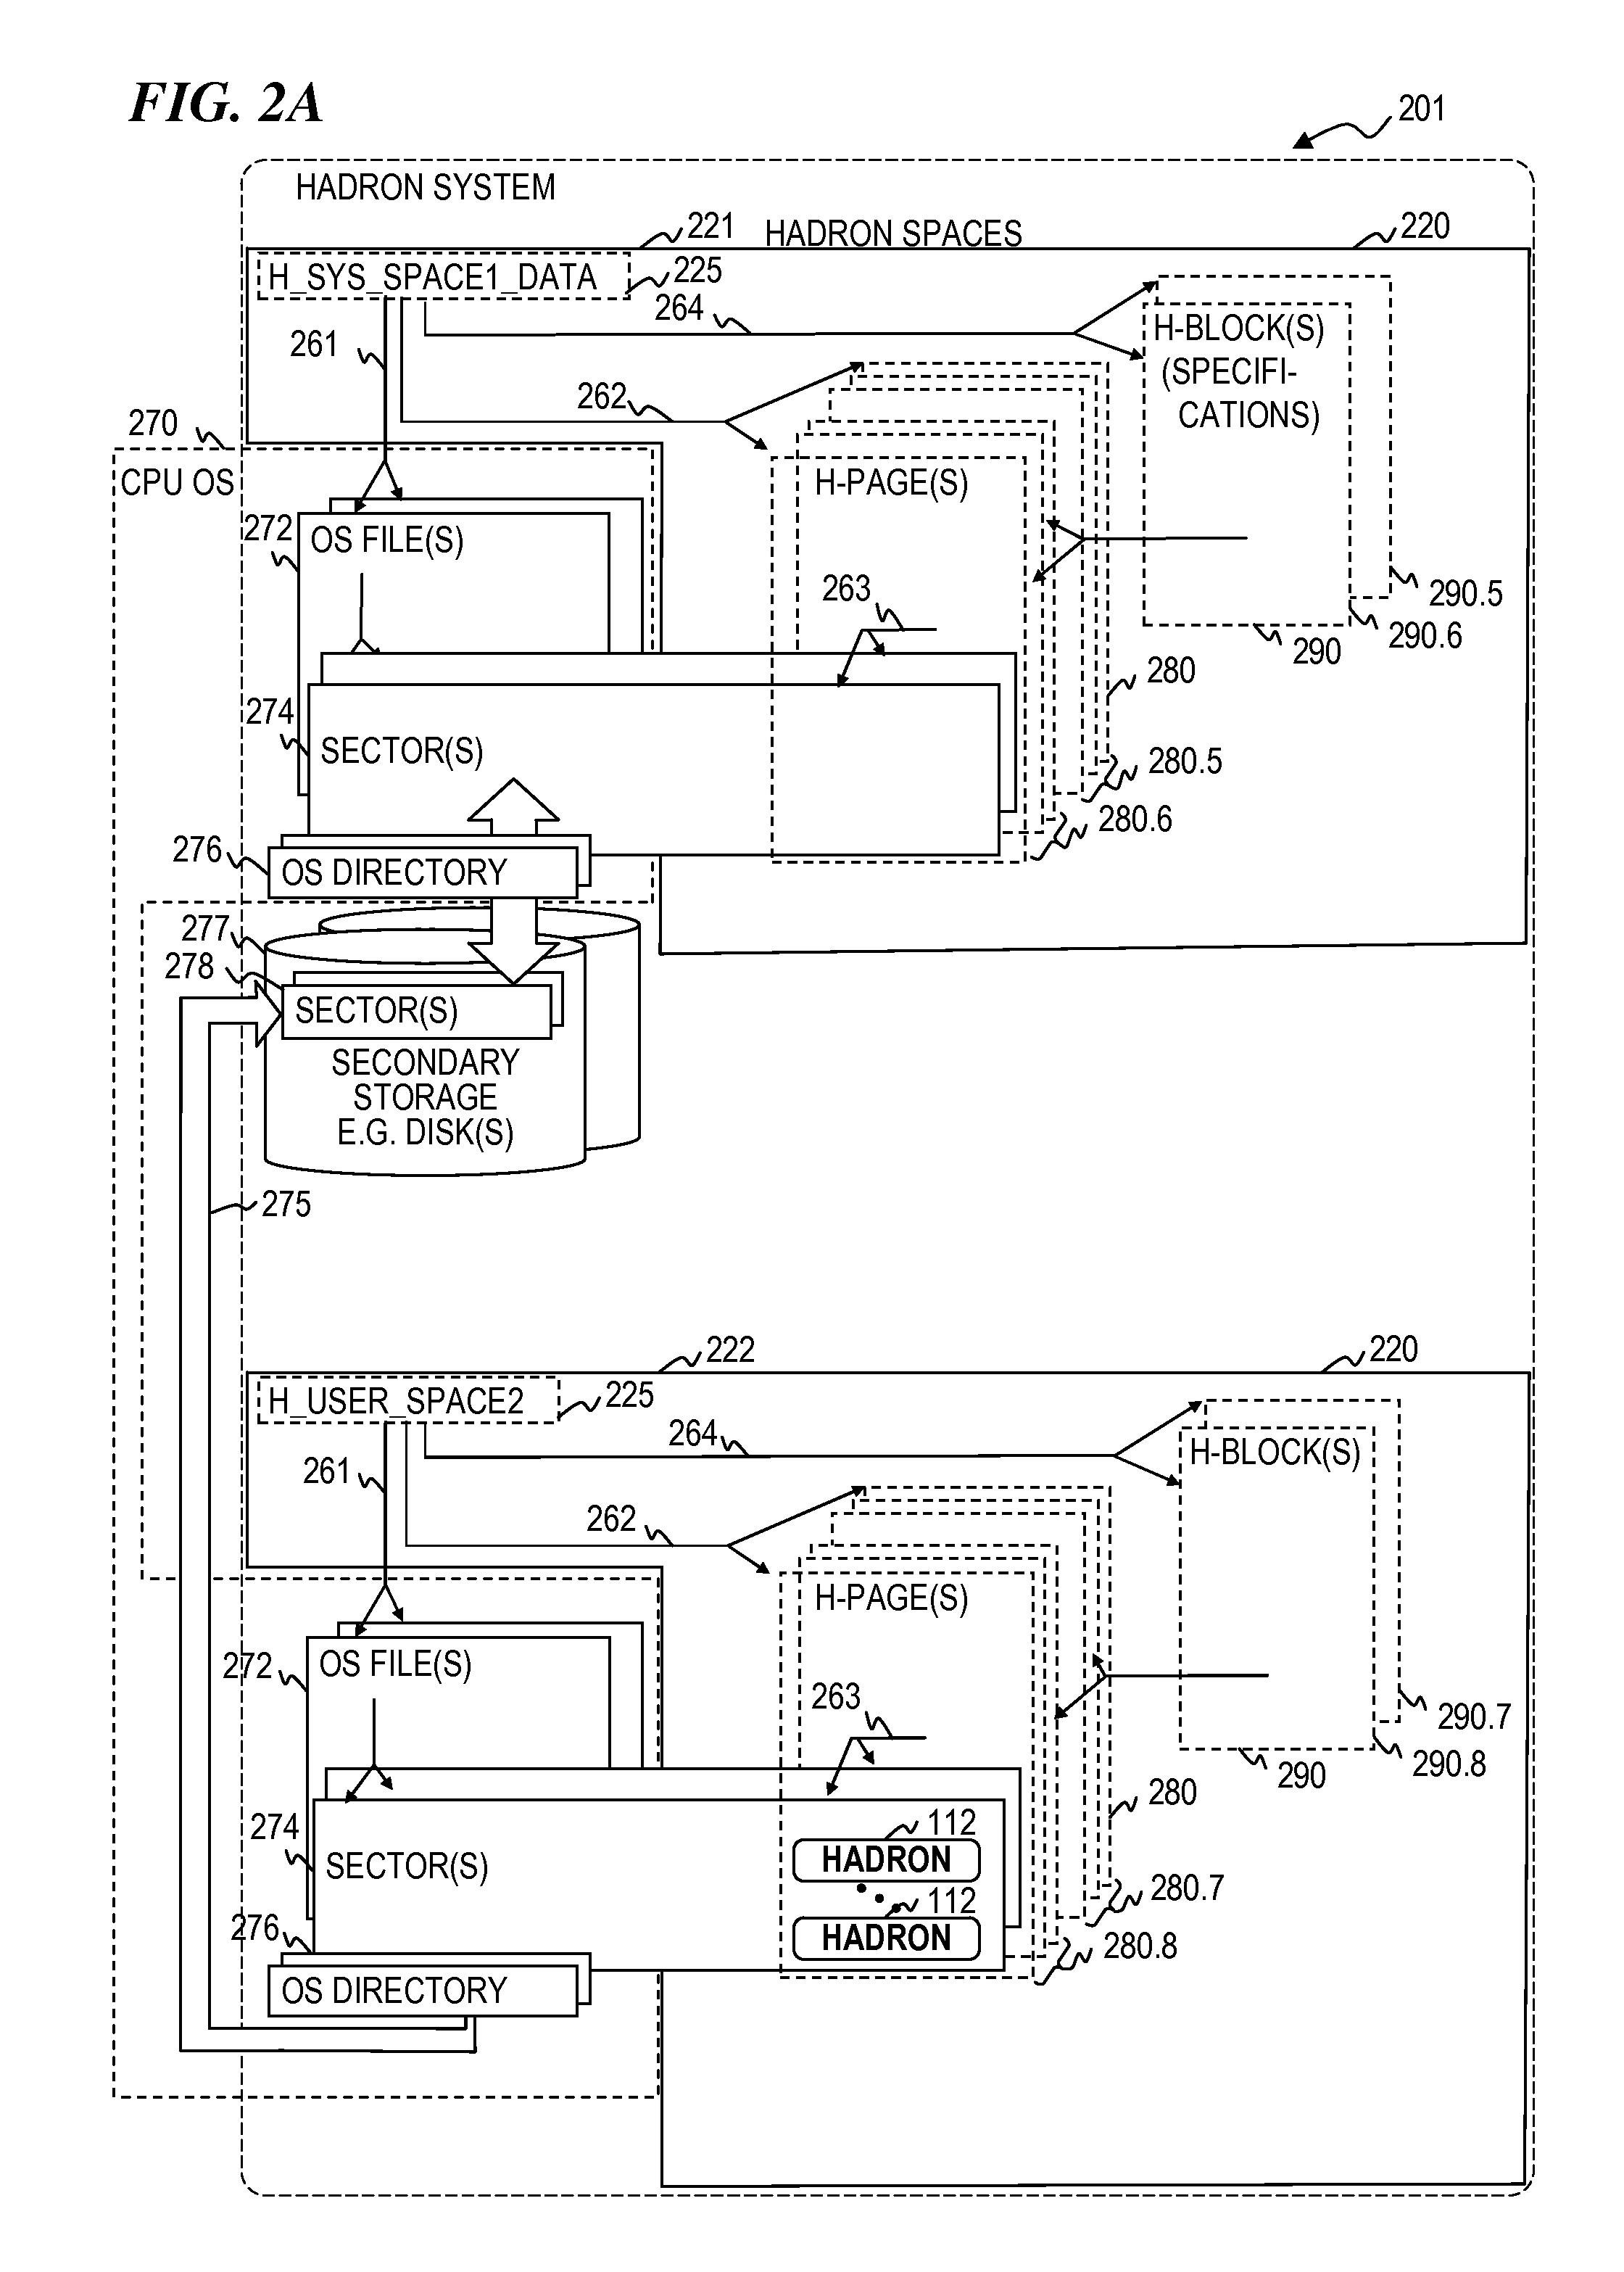 Apparatus and method for organizing, storing and retrieving data using a universal variable-length data structure